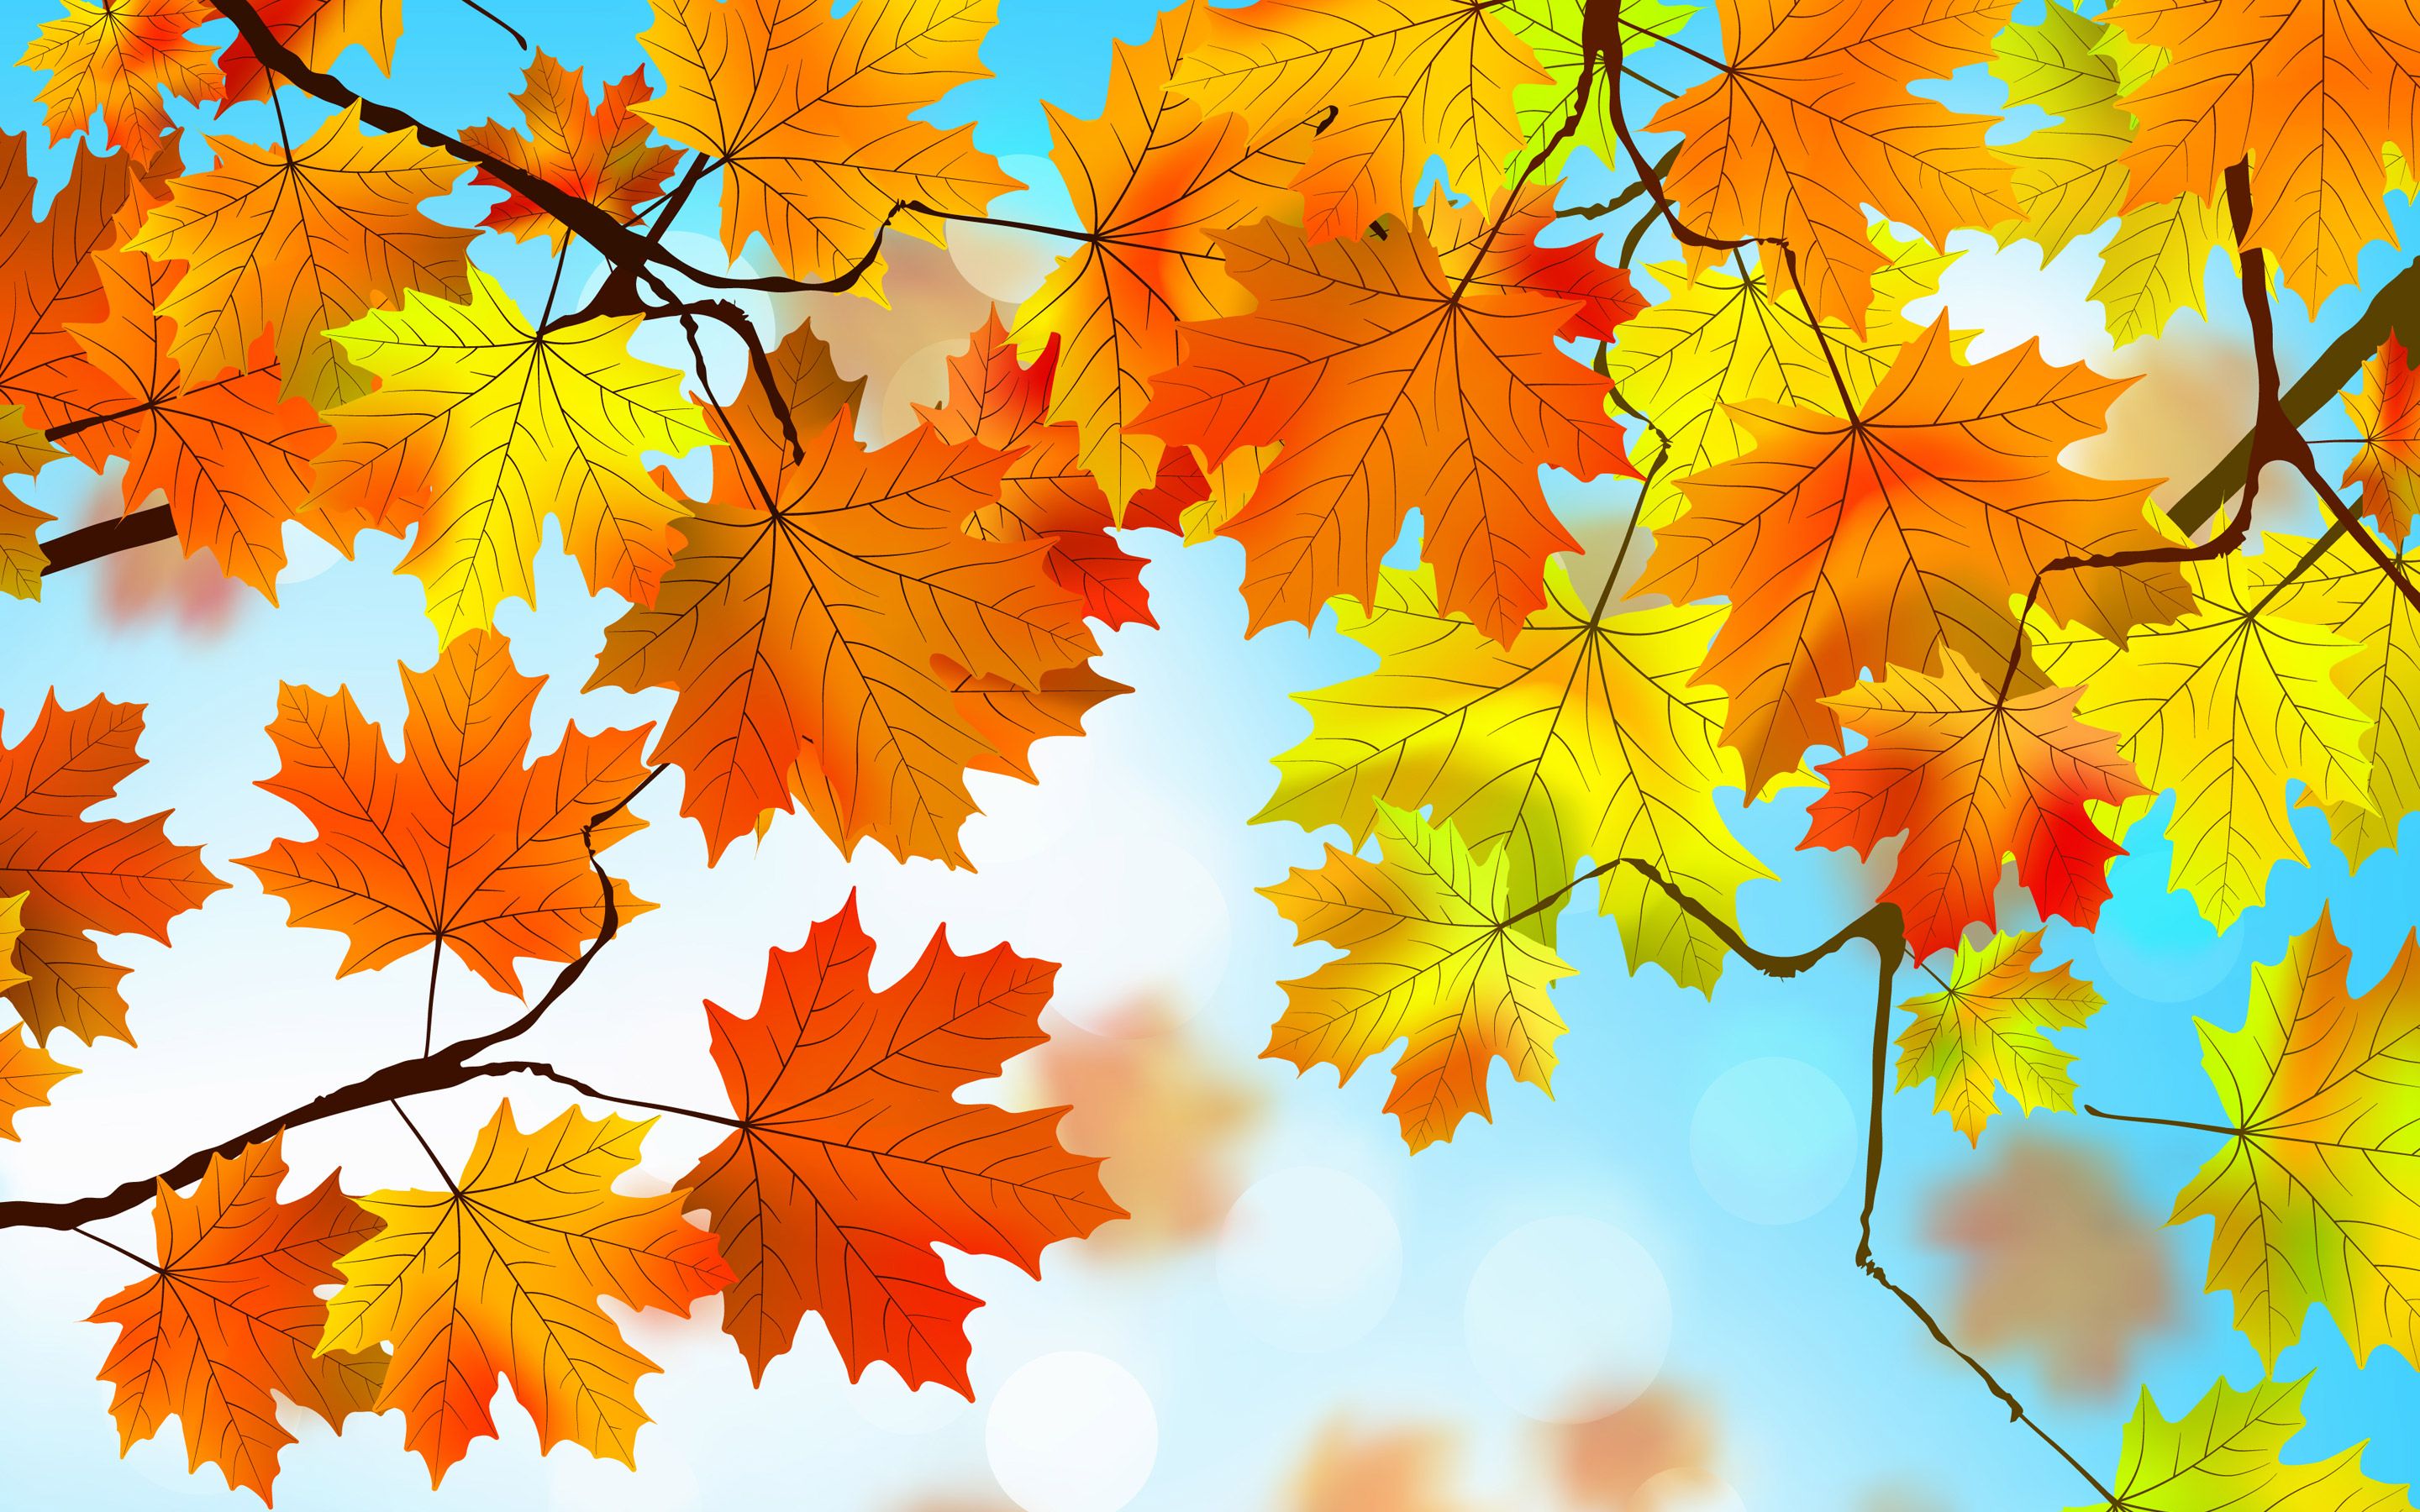 Autumn Leaves HD Apple iPhone, iPod Touch, Galaxy Ace HD 4k Wallpaper, Image, Background, Photo and Picture